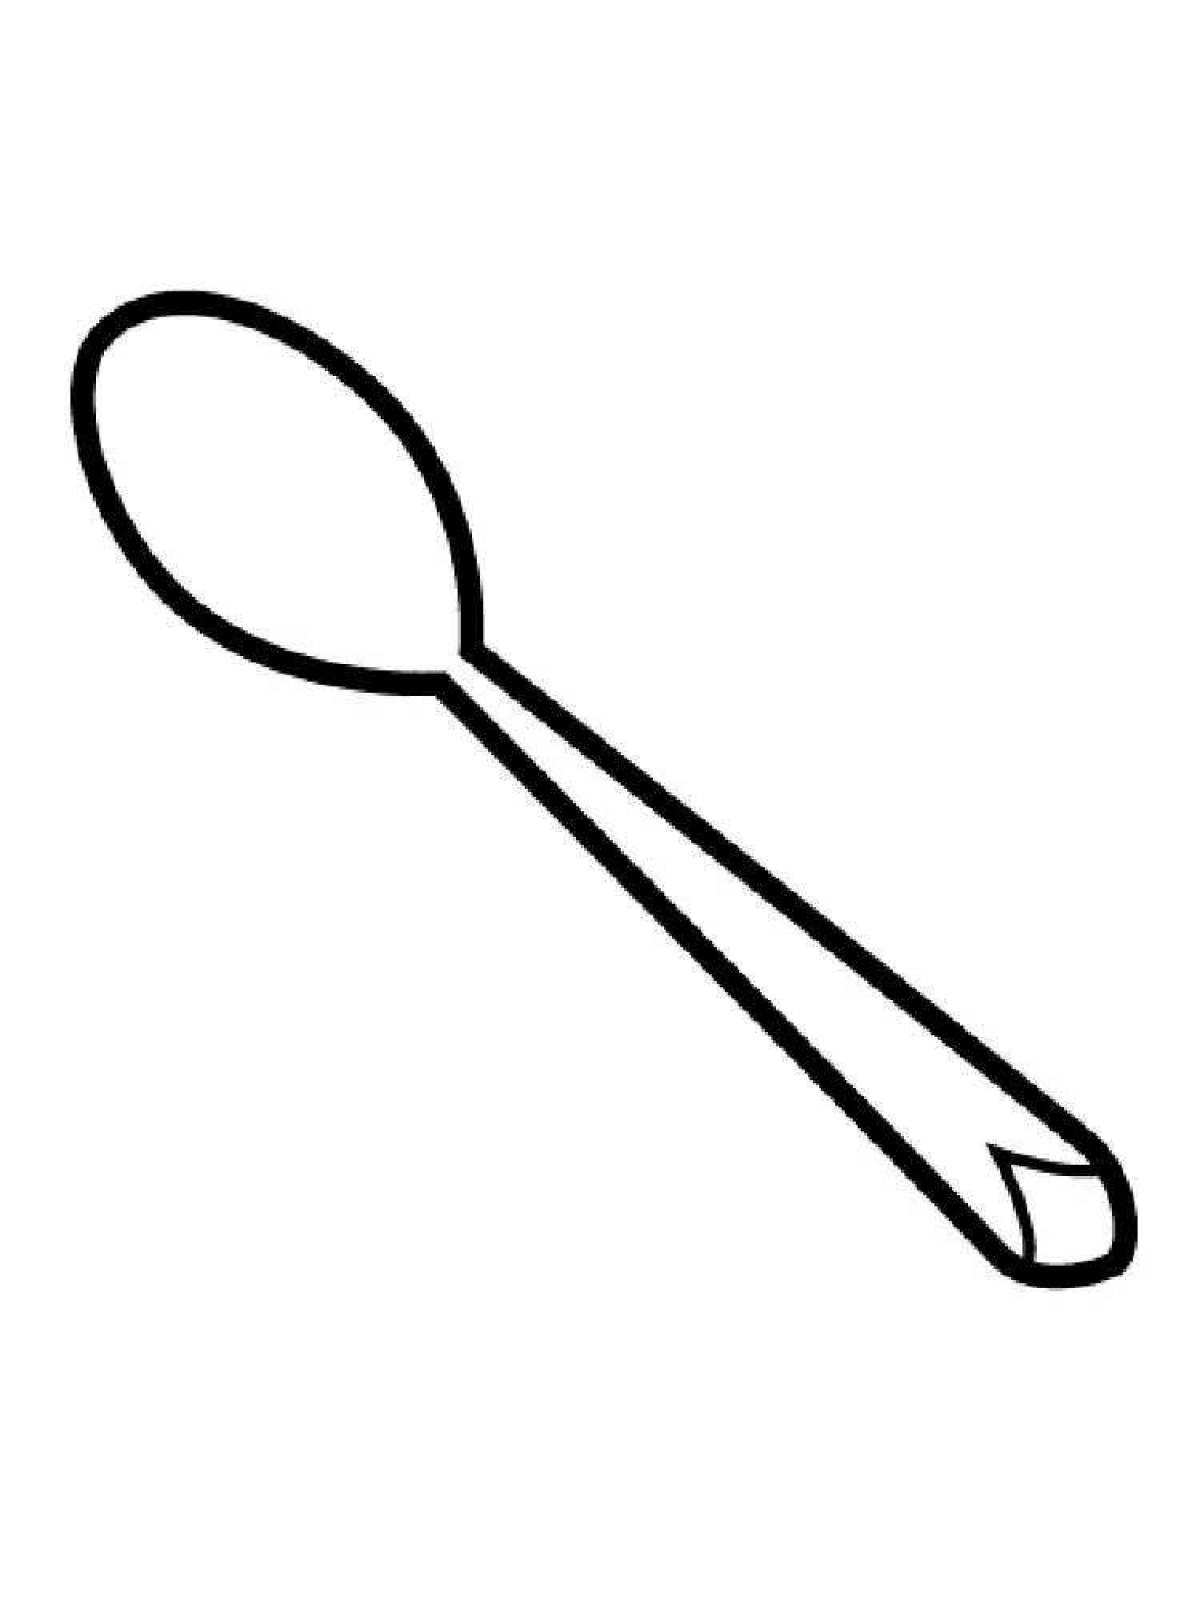 Coloring book glowing spoon for kids